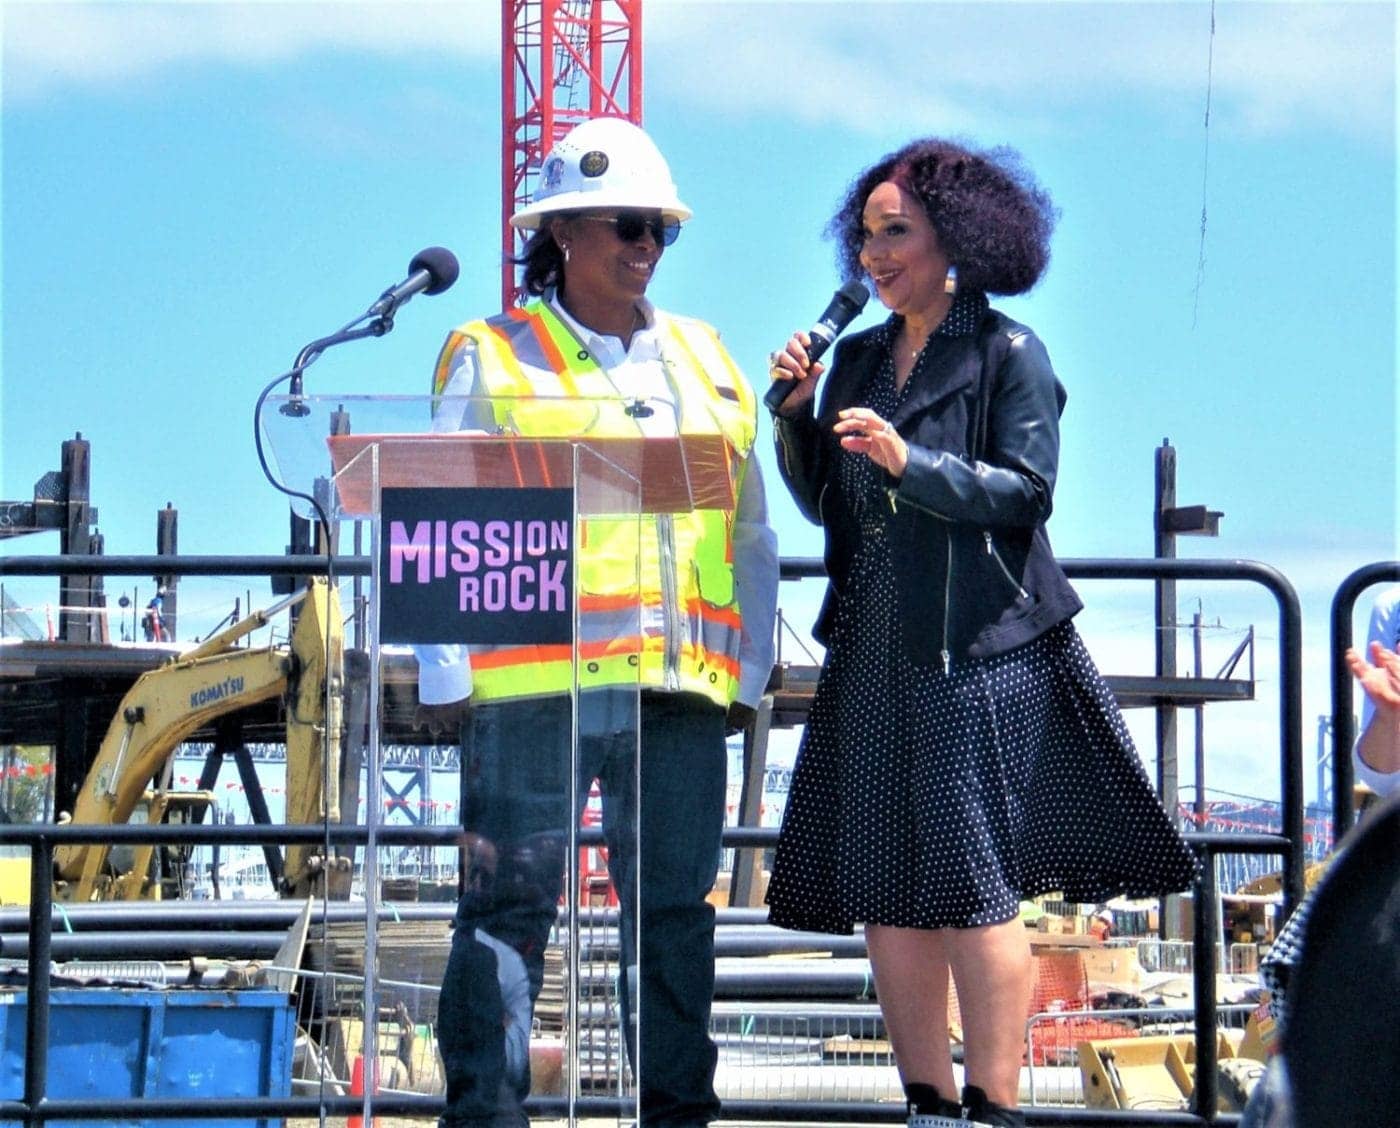 Renel-Brooks-Moon-Giants-public-address-announcer-introduces-Tana-Harris-of-Harris-Hoisting-at-Mission-Rock-groundbreaking-ceremony-by-Bettina-Cohen-062221-1400x1128, Building up women for careers in construction, Local News & Views 